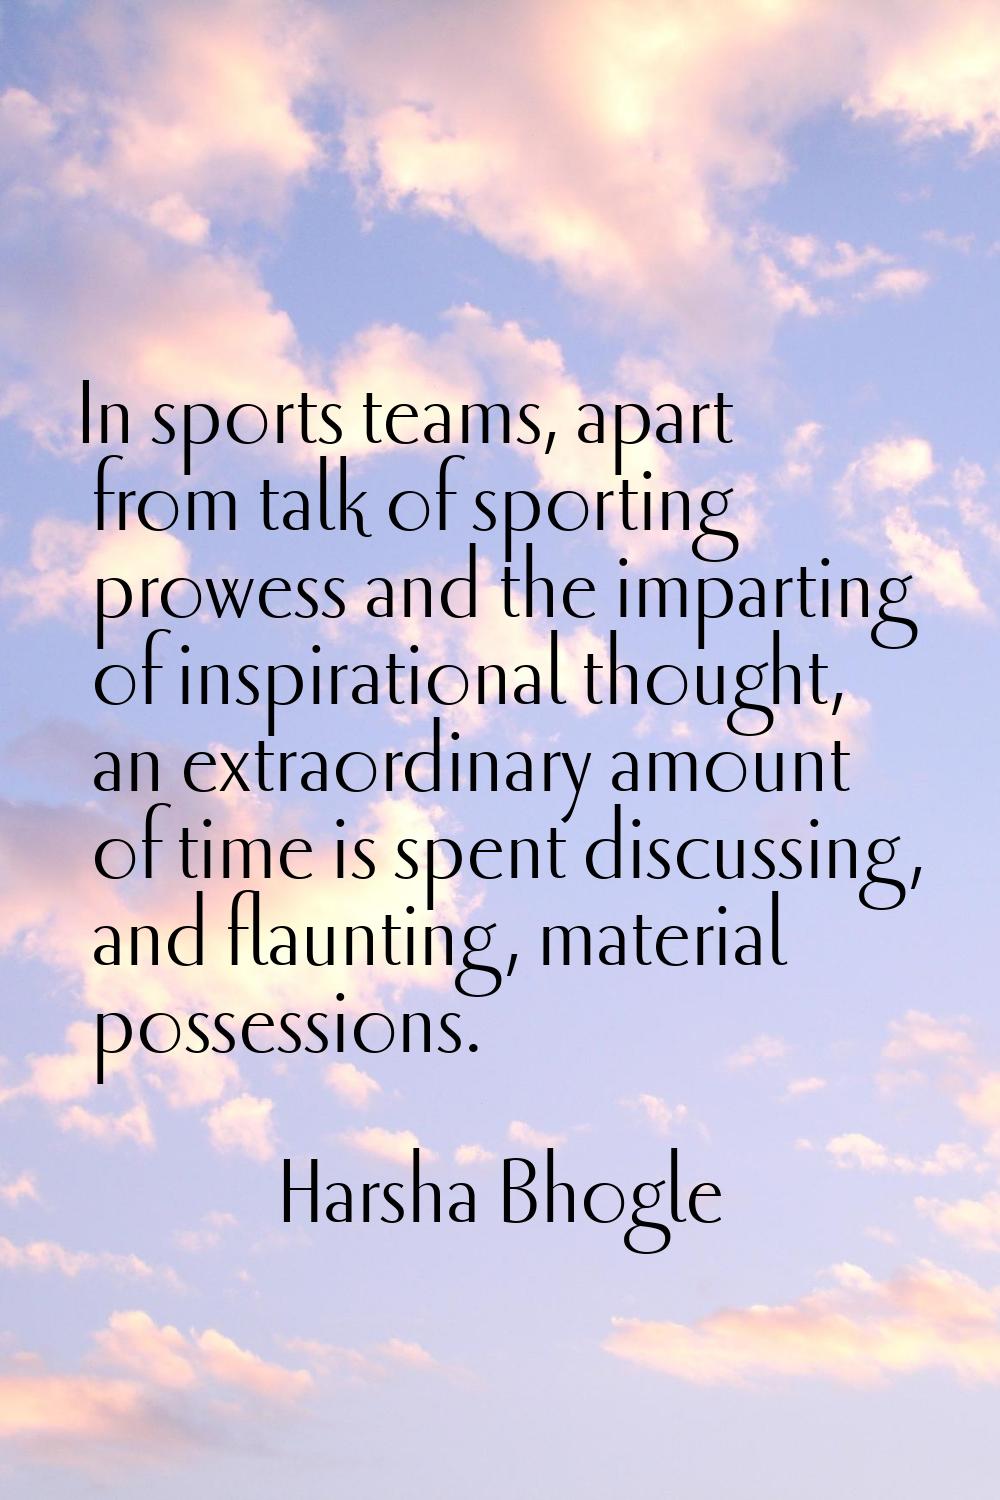 In sports teams, apart from talk of sporting prowess and the imparting of inspirational thought, an